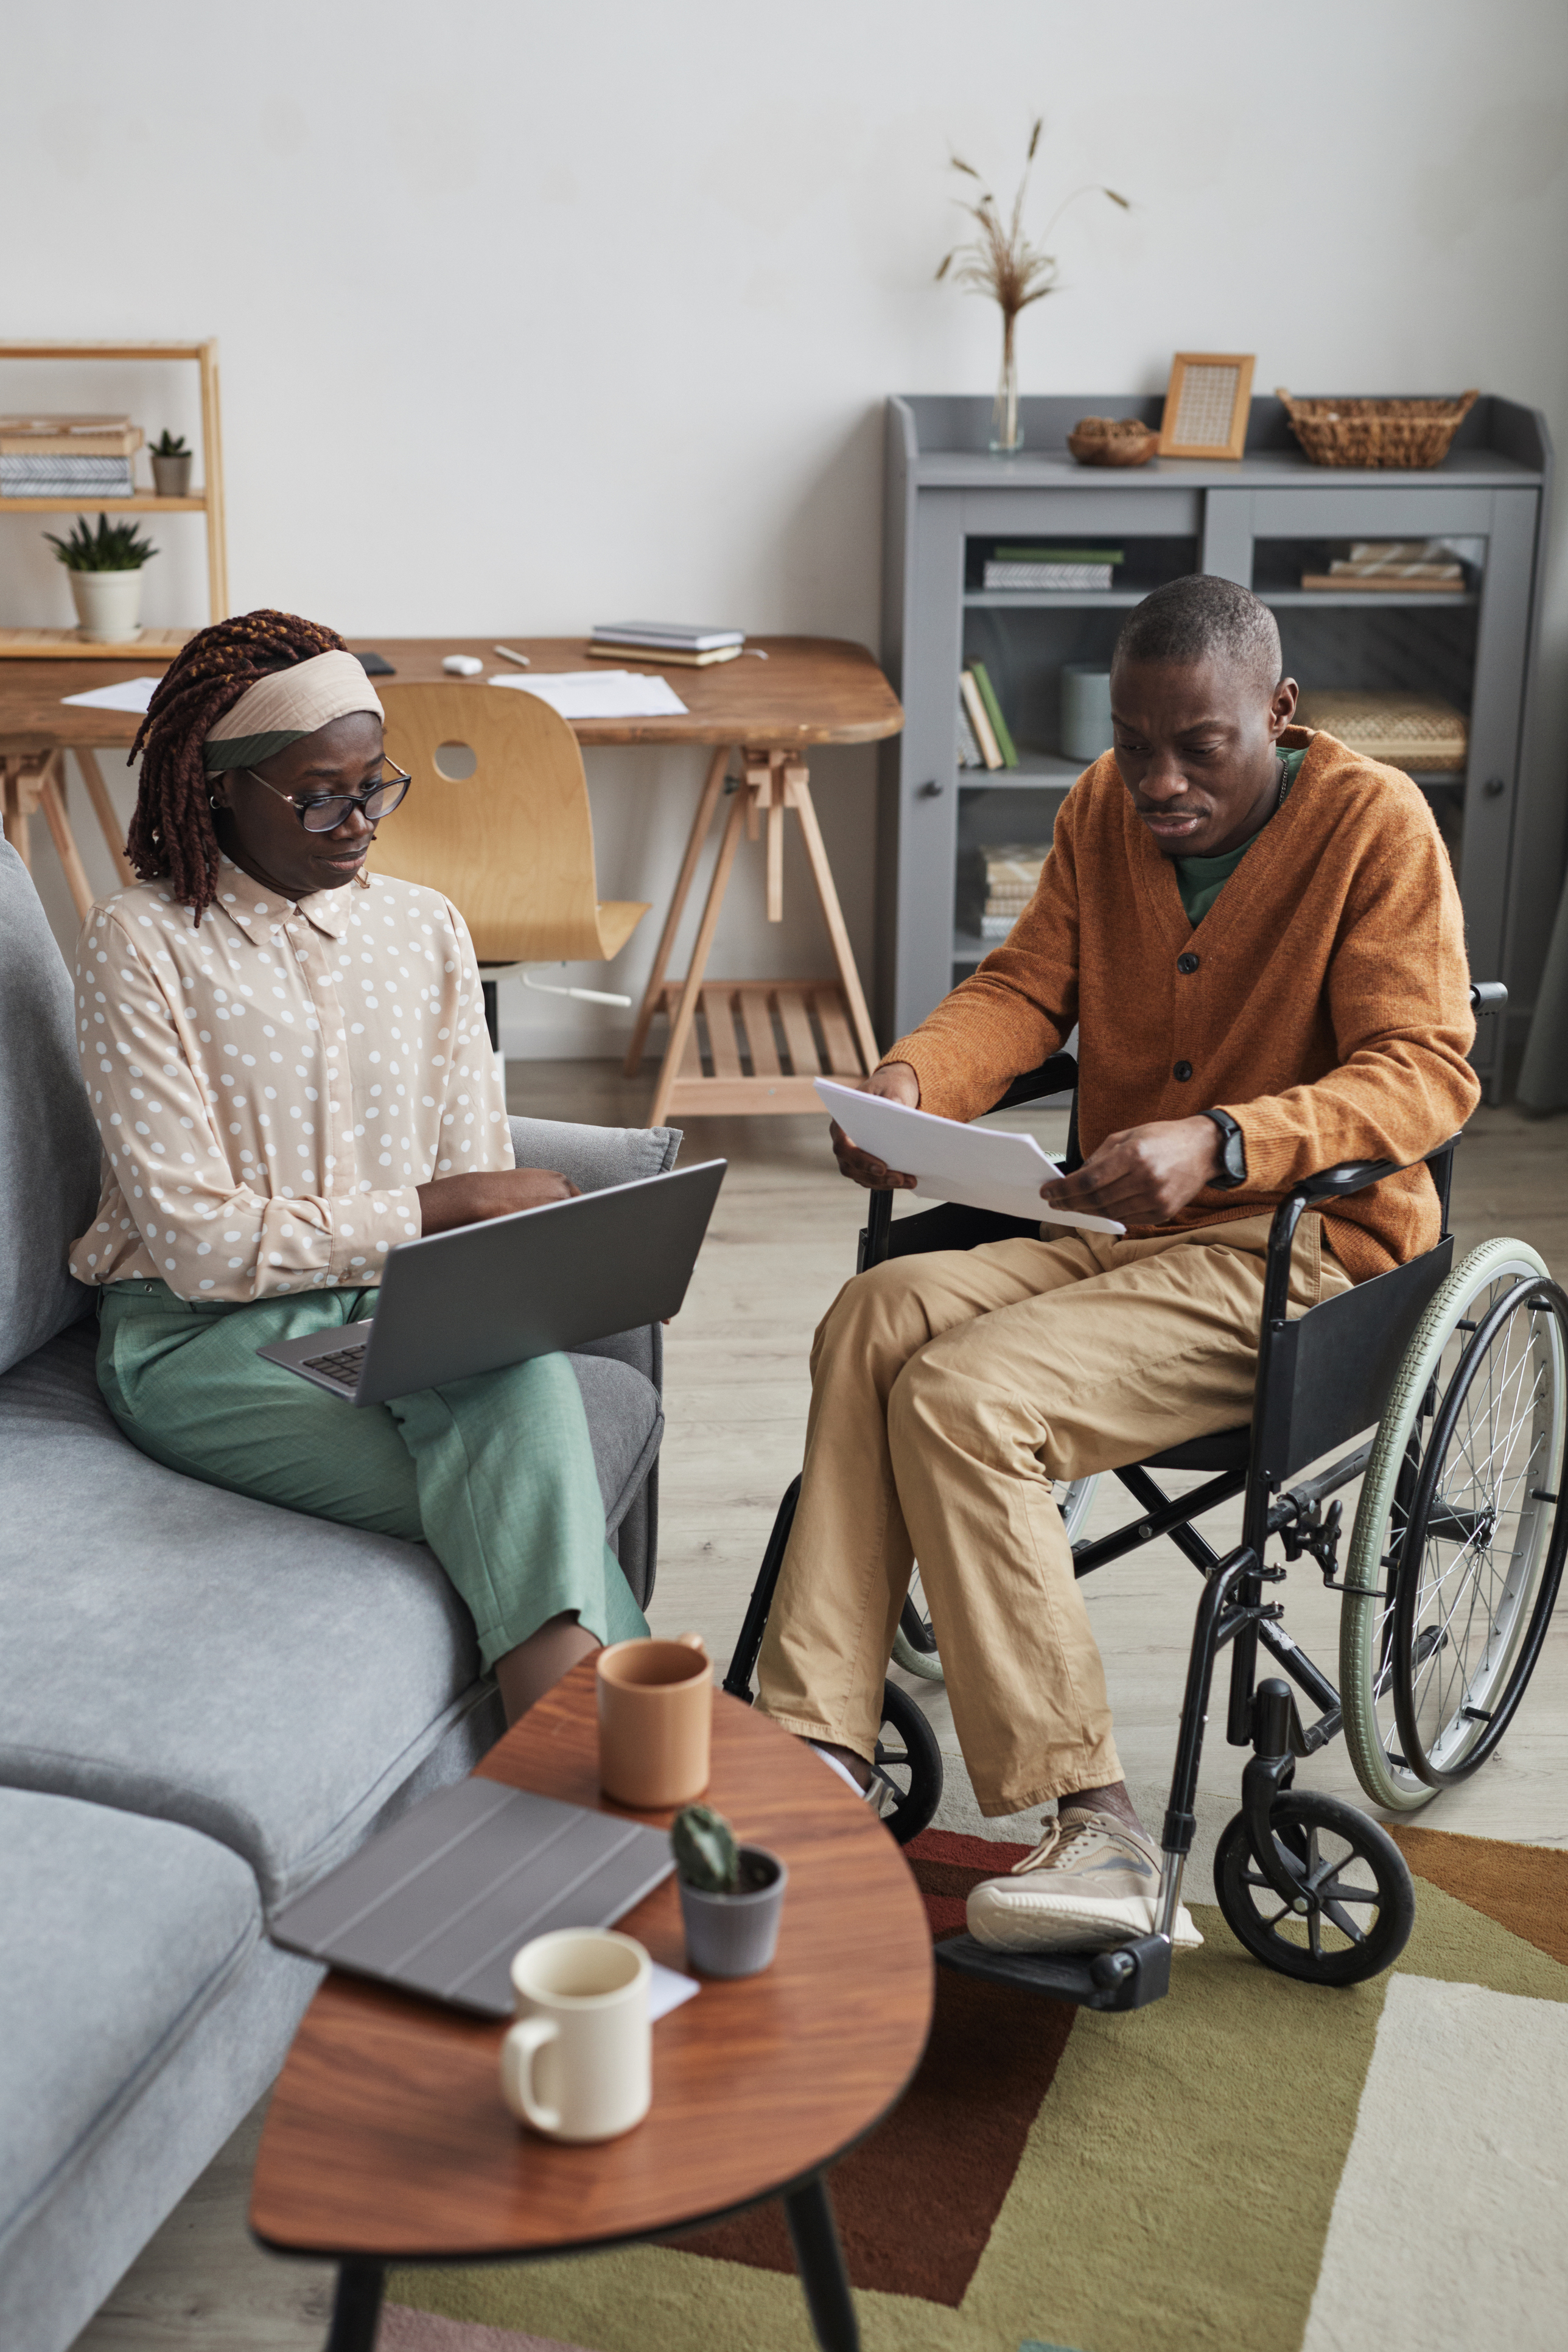 Vertical full length portrait of African-American couple with handicapped man working from home together in modern interior